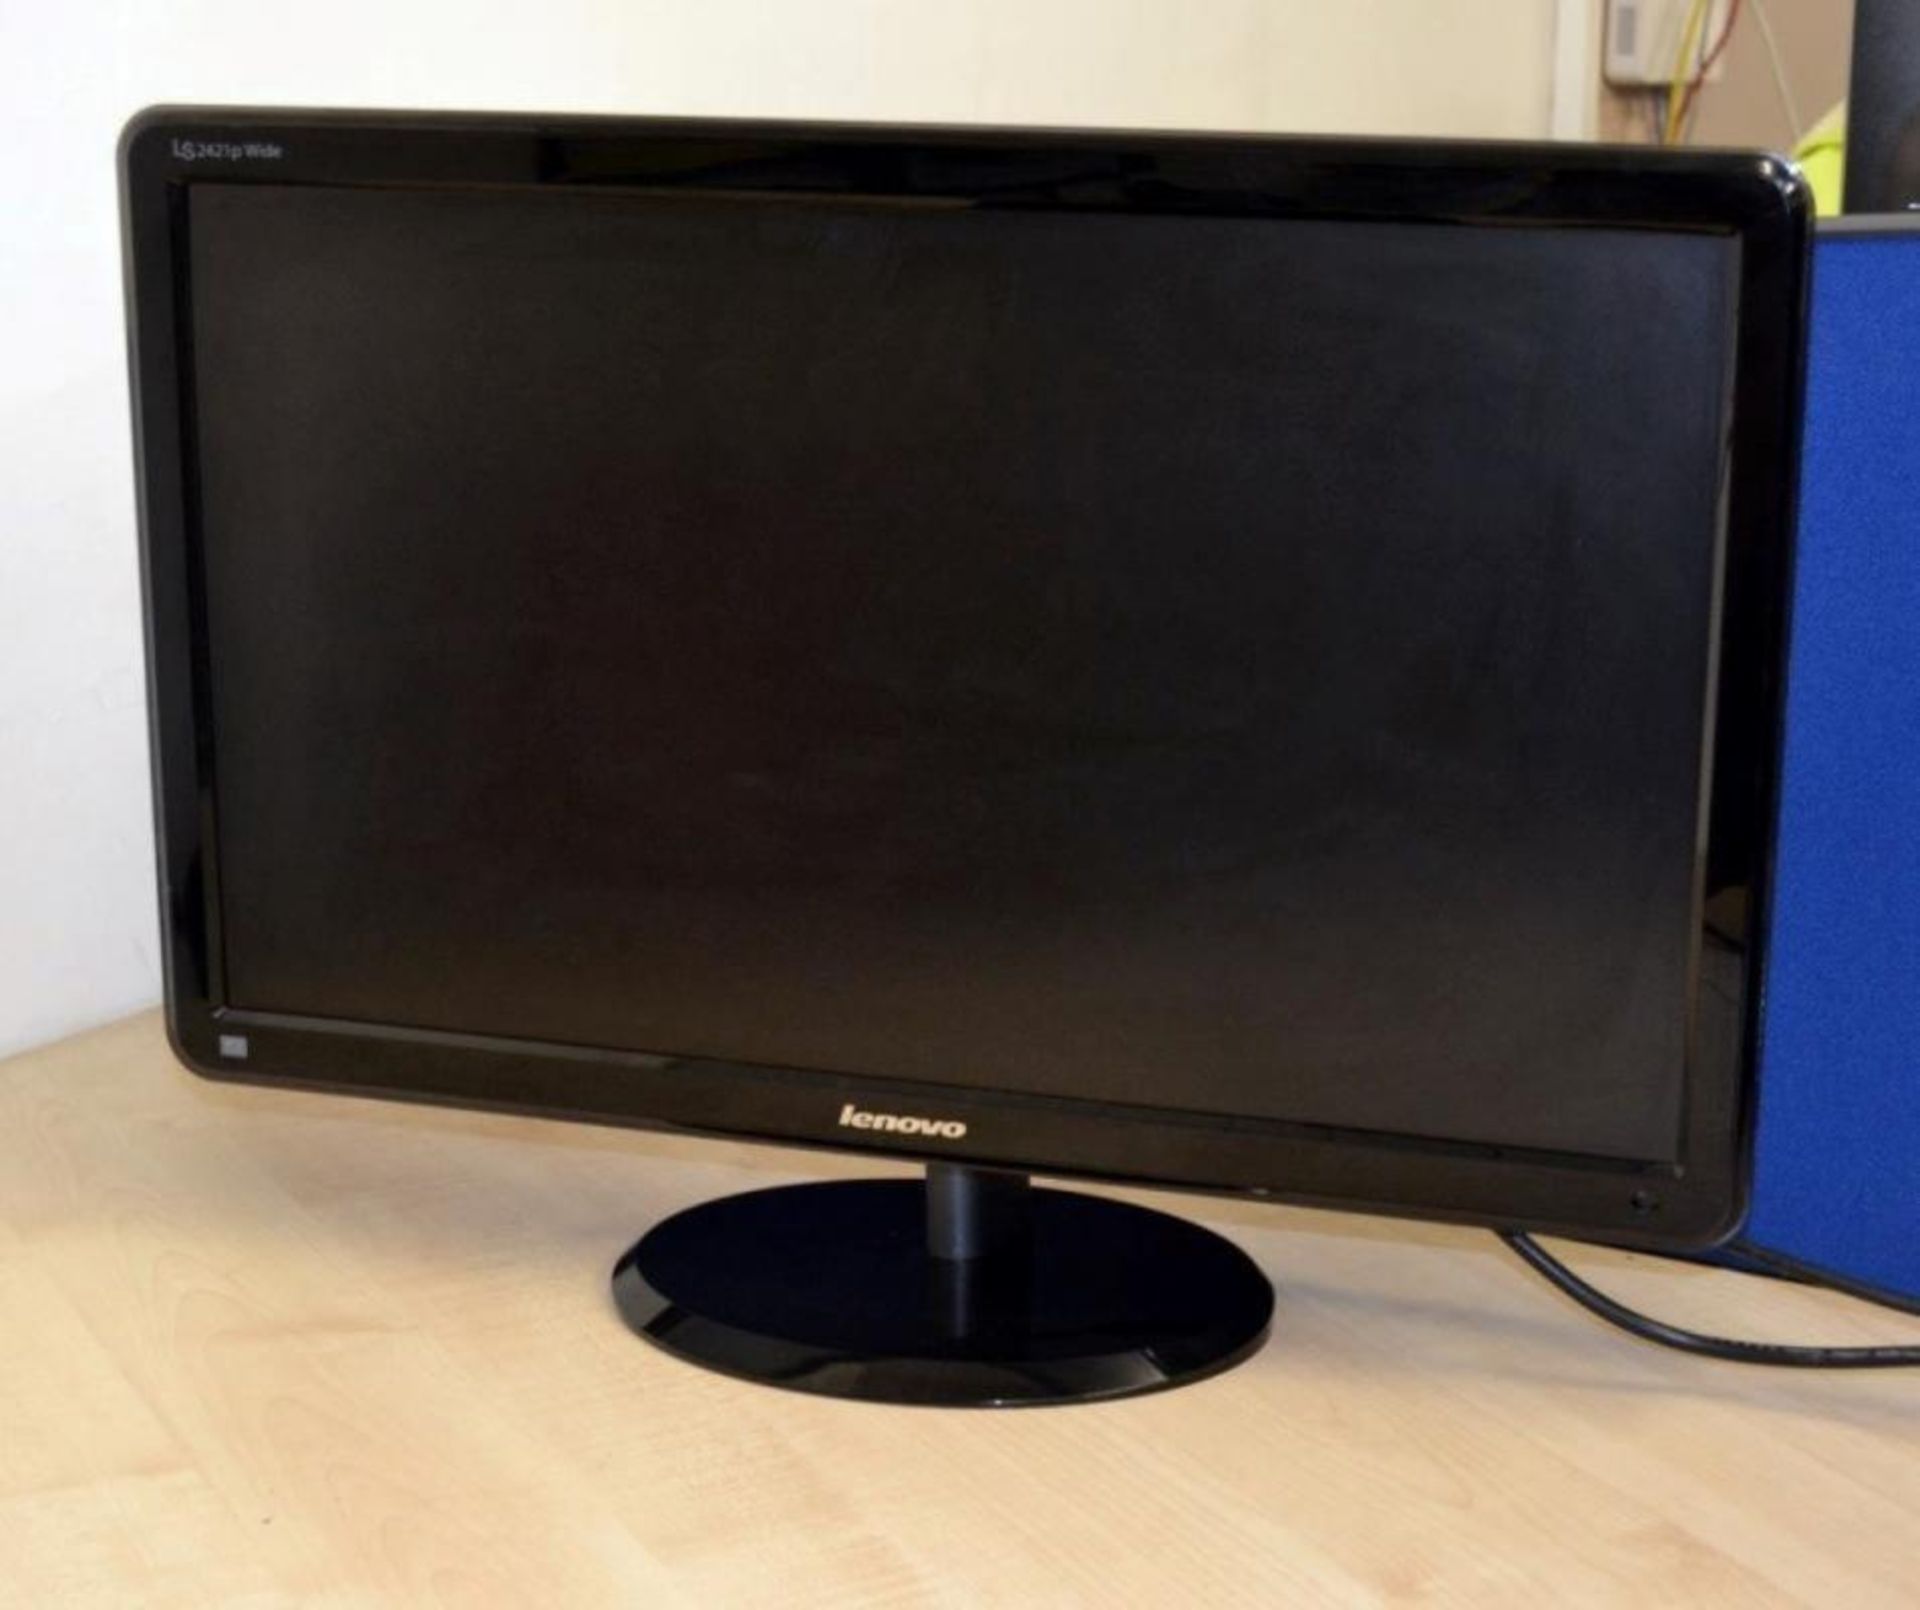 2 x Lenovo LS2421p Wide 23.6" Full HD LED TFT Monitors (Model: 4015-LS1) - Recently Taken From A - Image 7 of 11